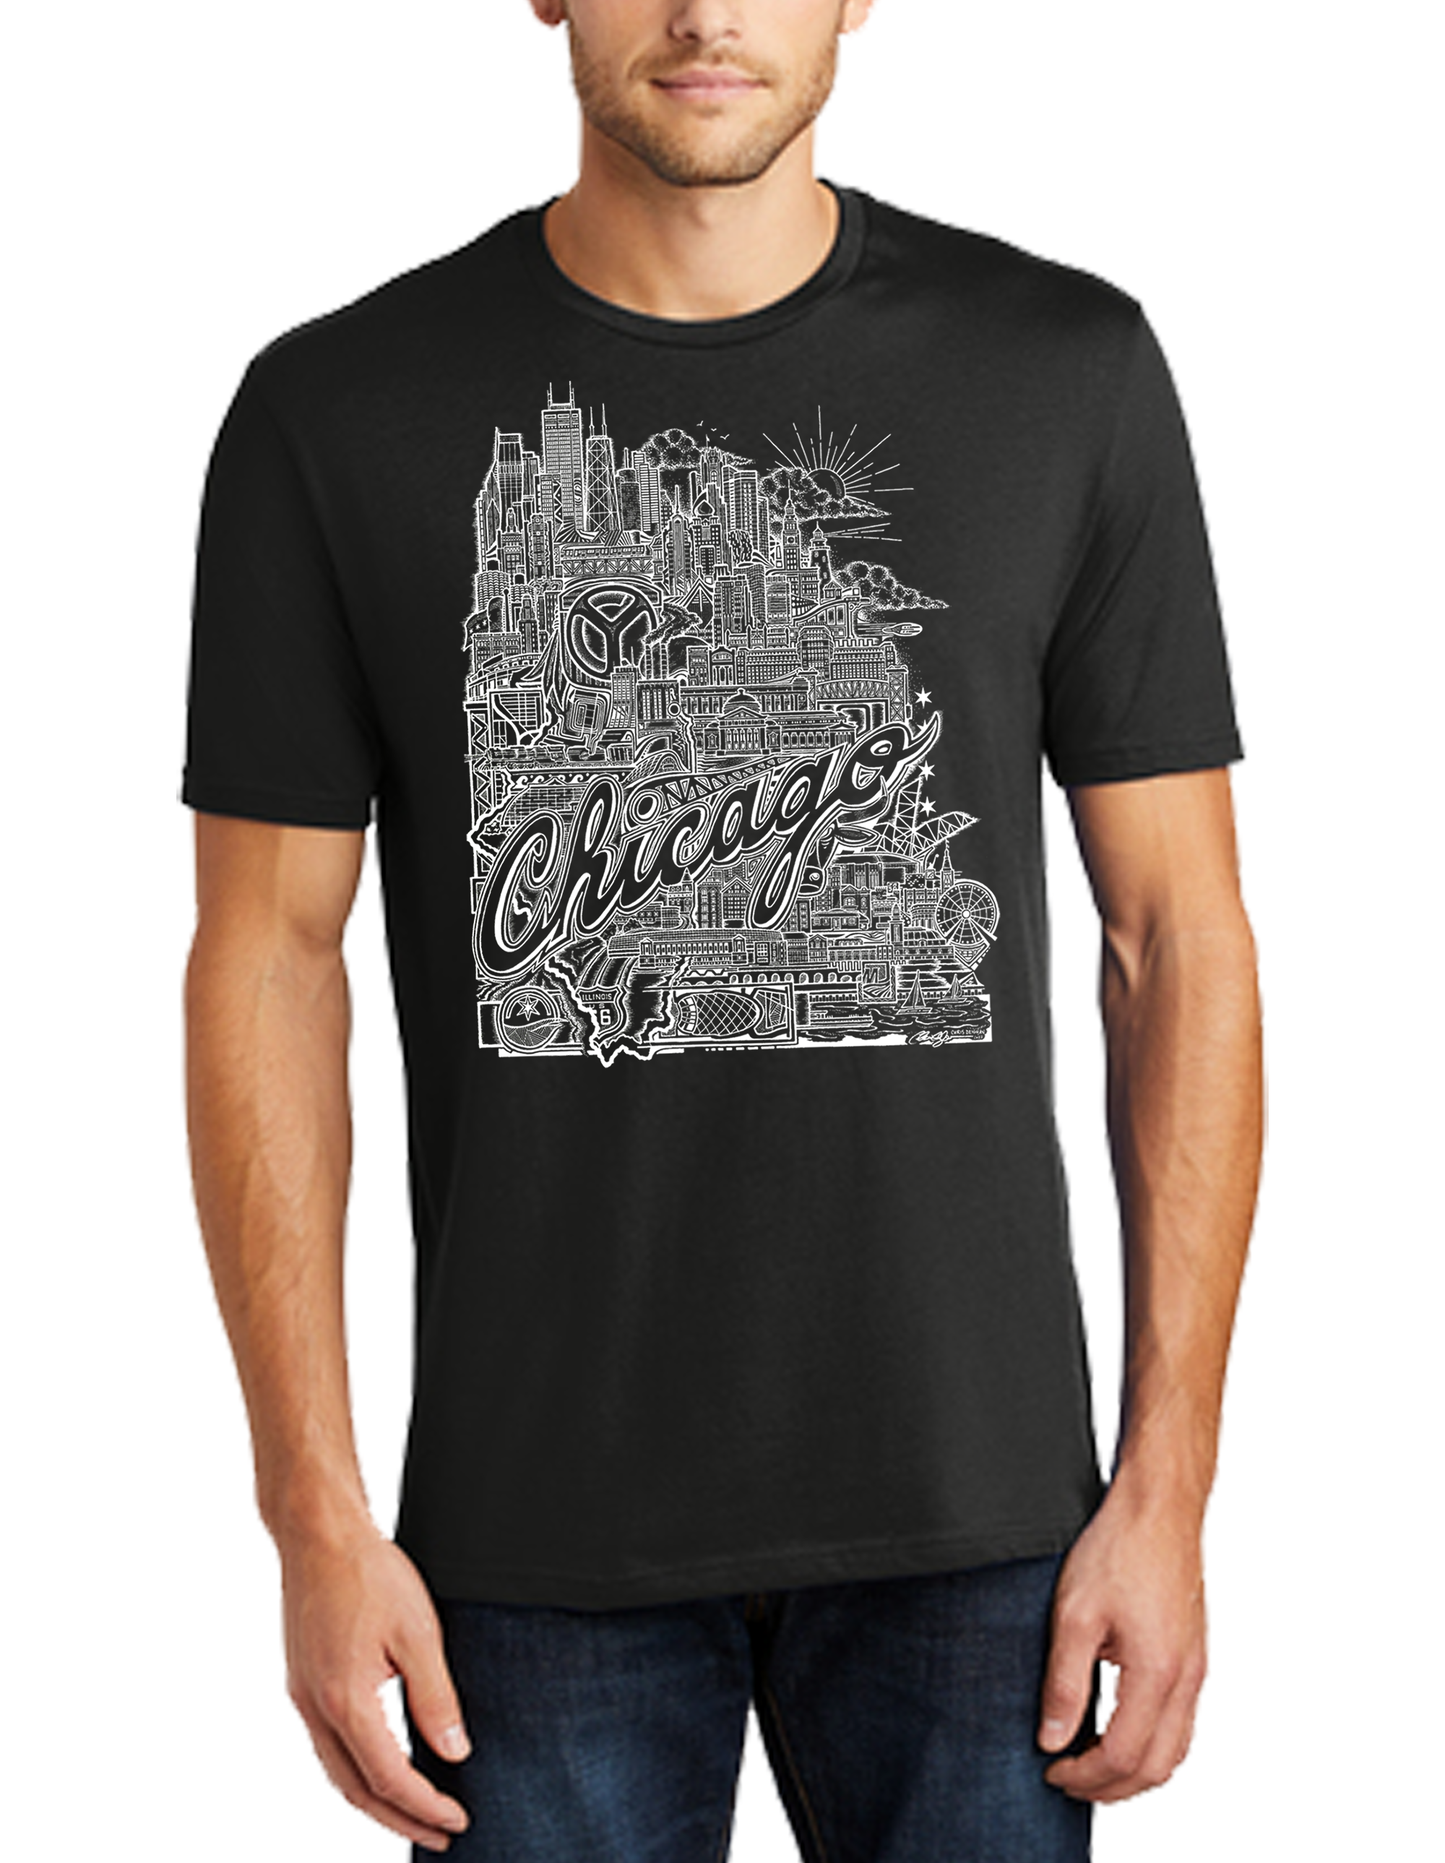 Chicago T-Shirt Red